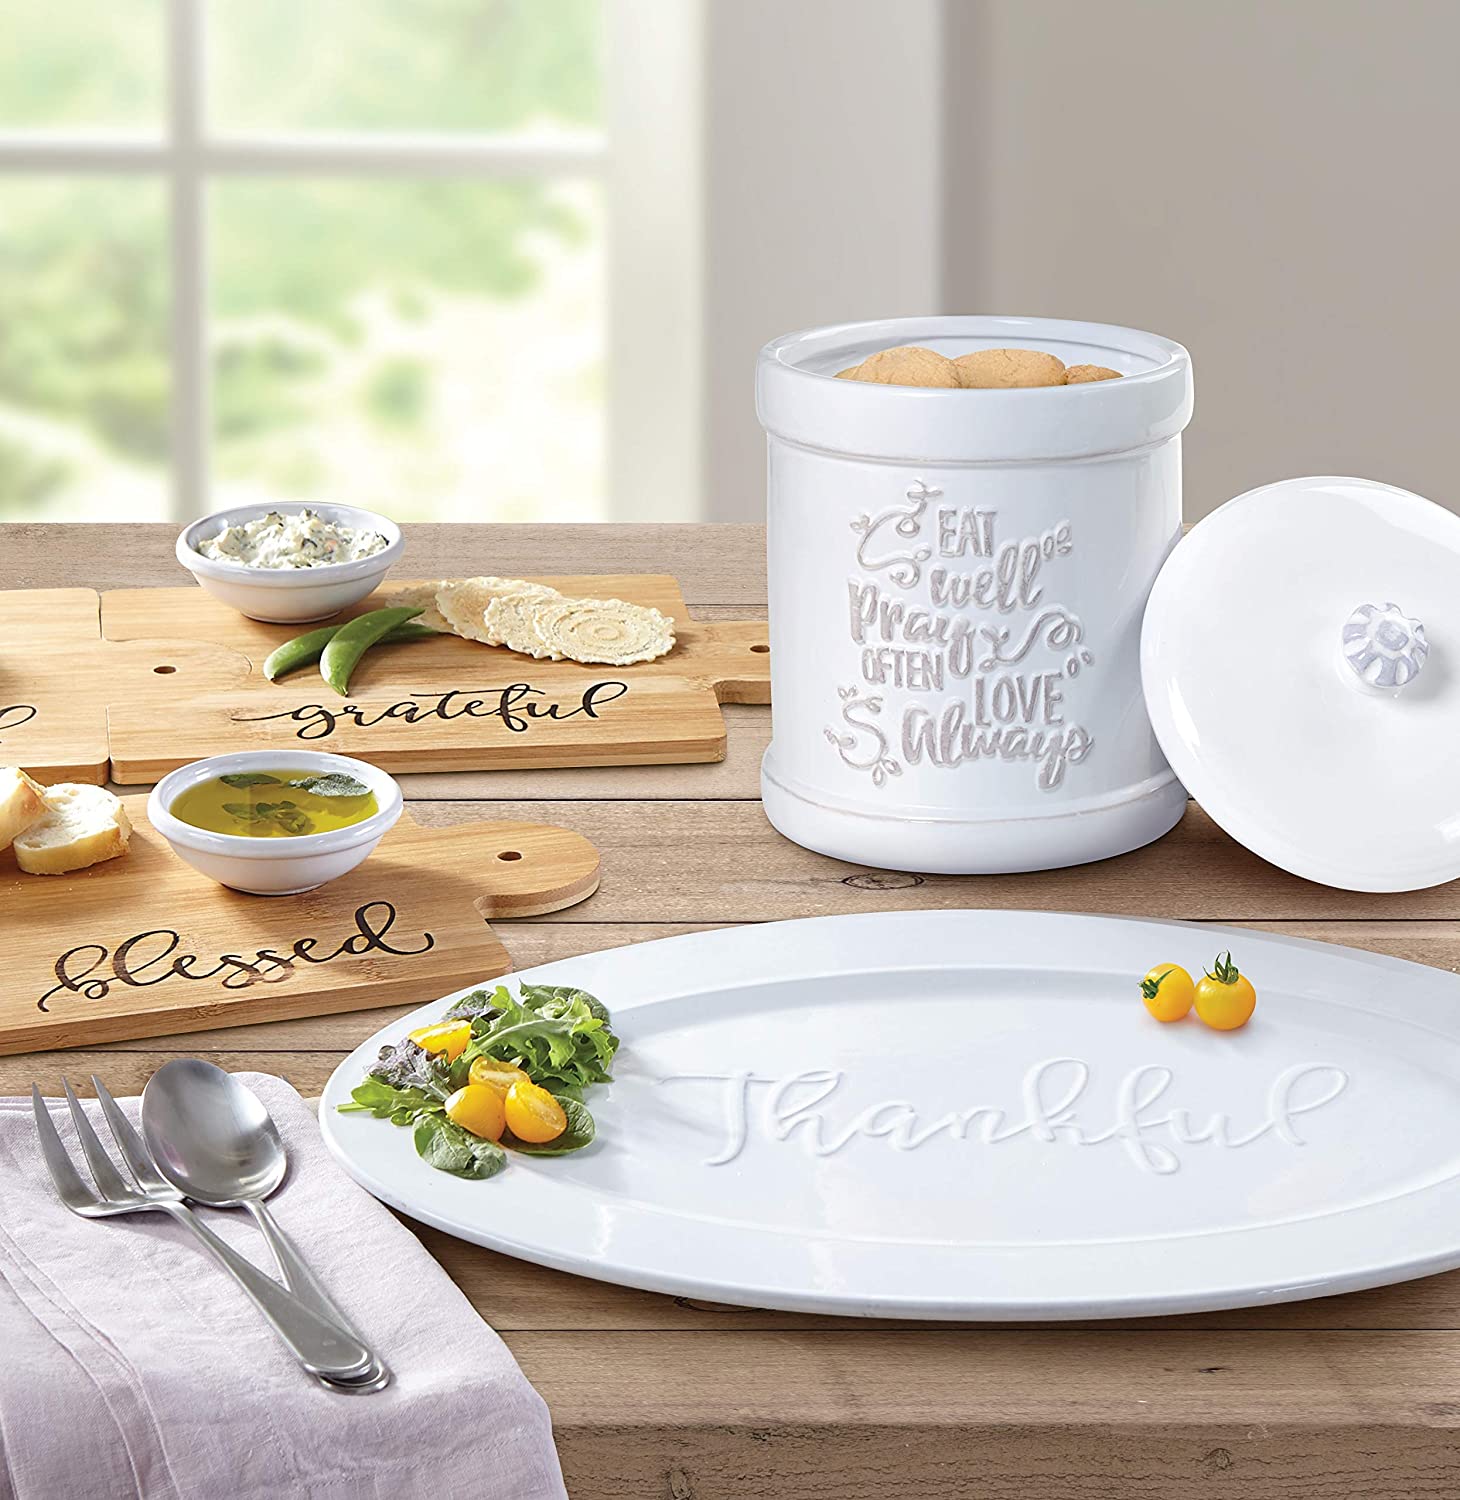 Bountiful Blessings by Precious Moments Thankful Ceramic Serving Platter White 18-inches by 12-inches - image 3 of 4